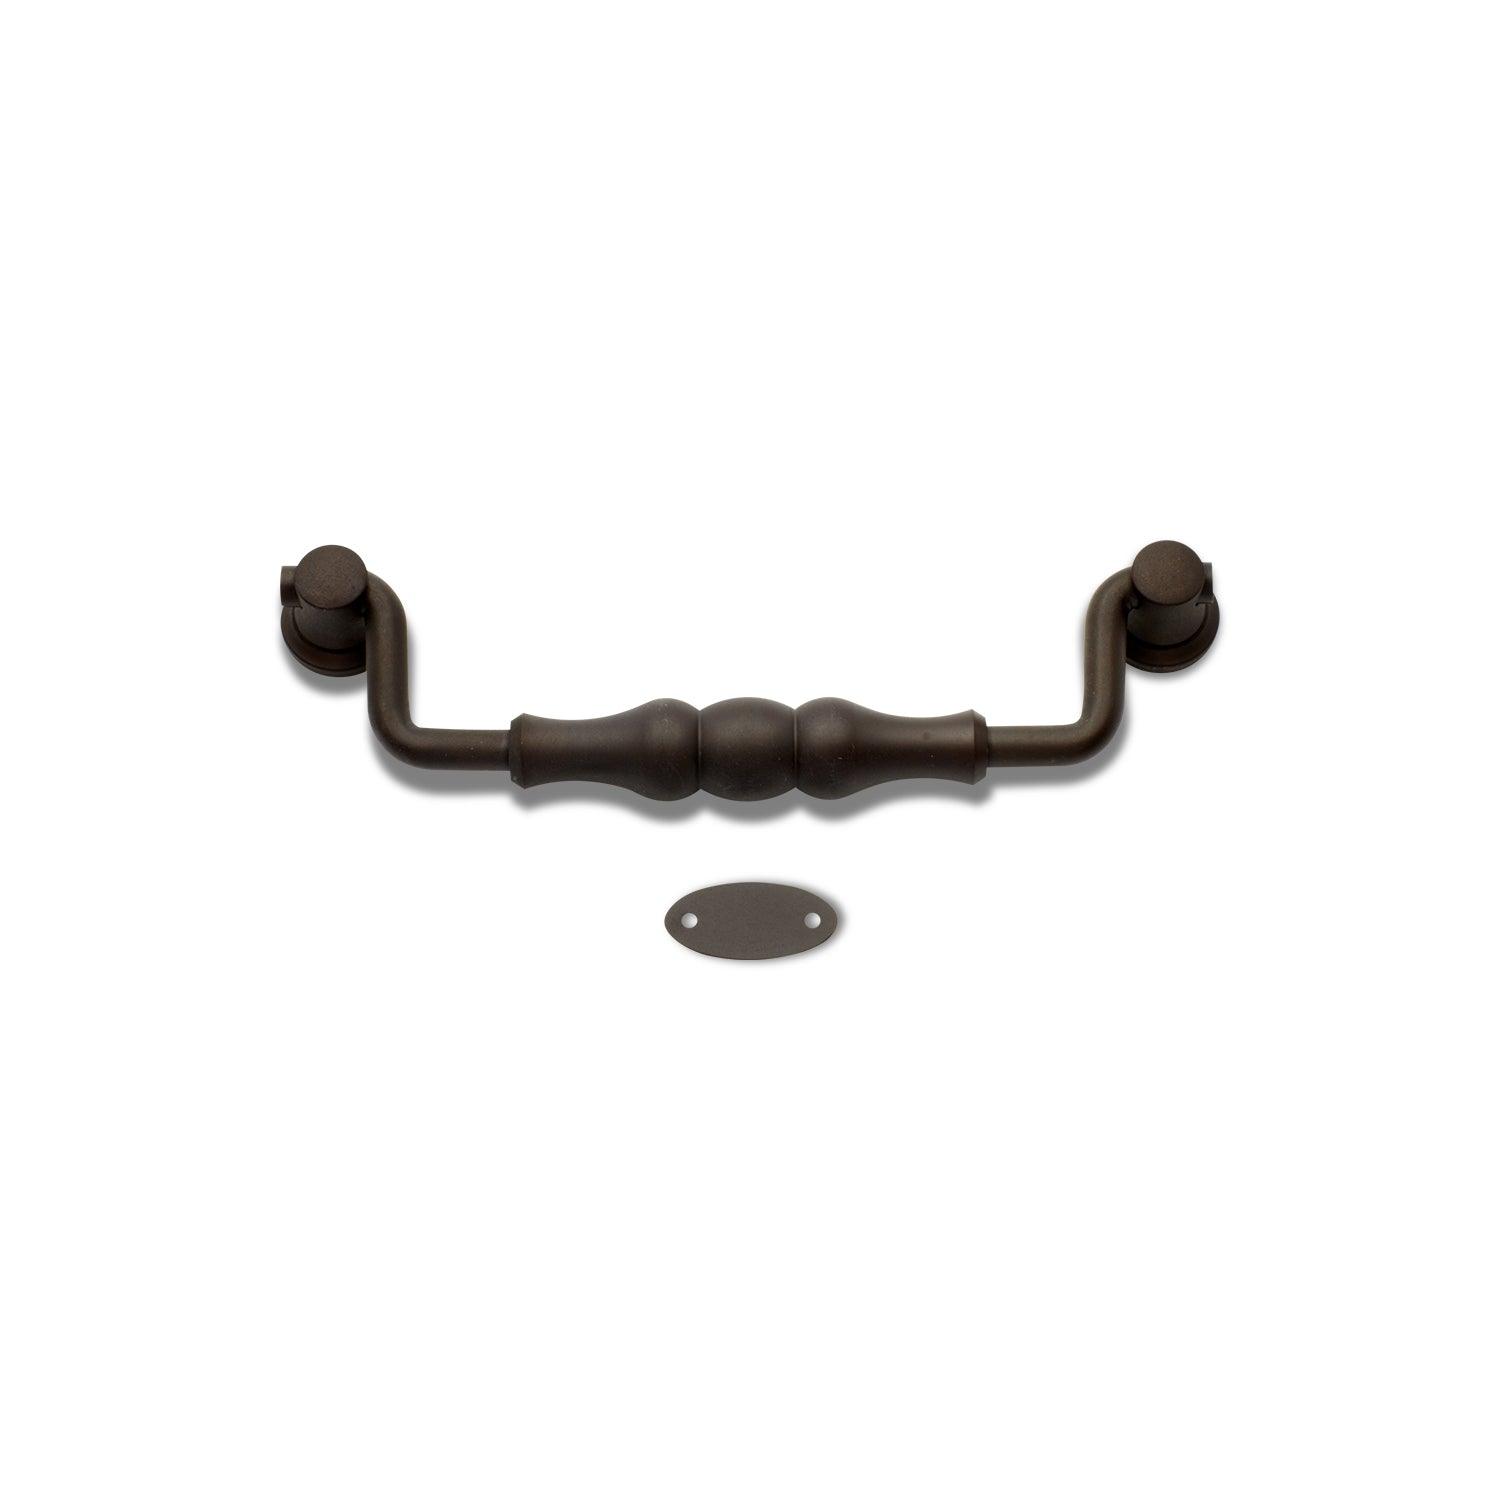 RKI - Beaded Middle Collection - Hanging Cabinet Pull - APex Hardware NY 